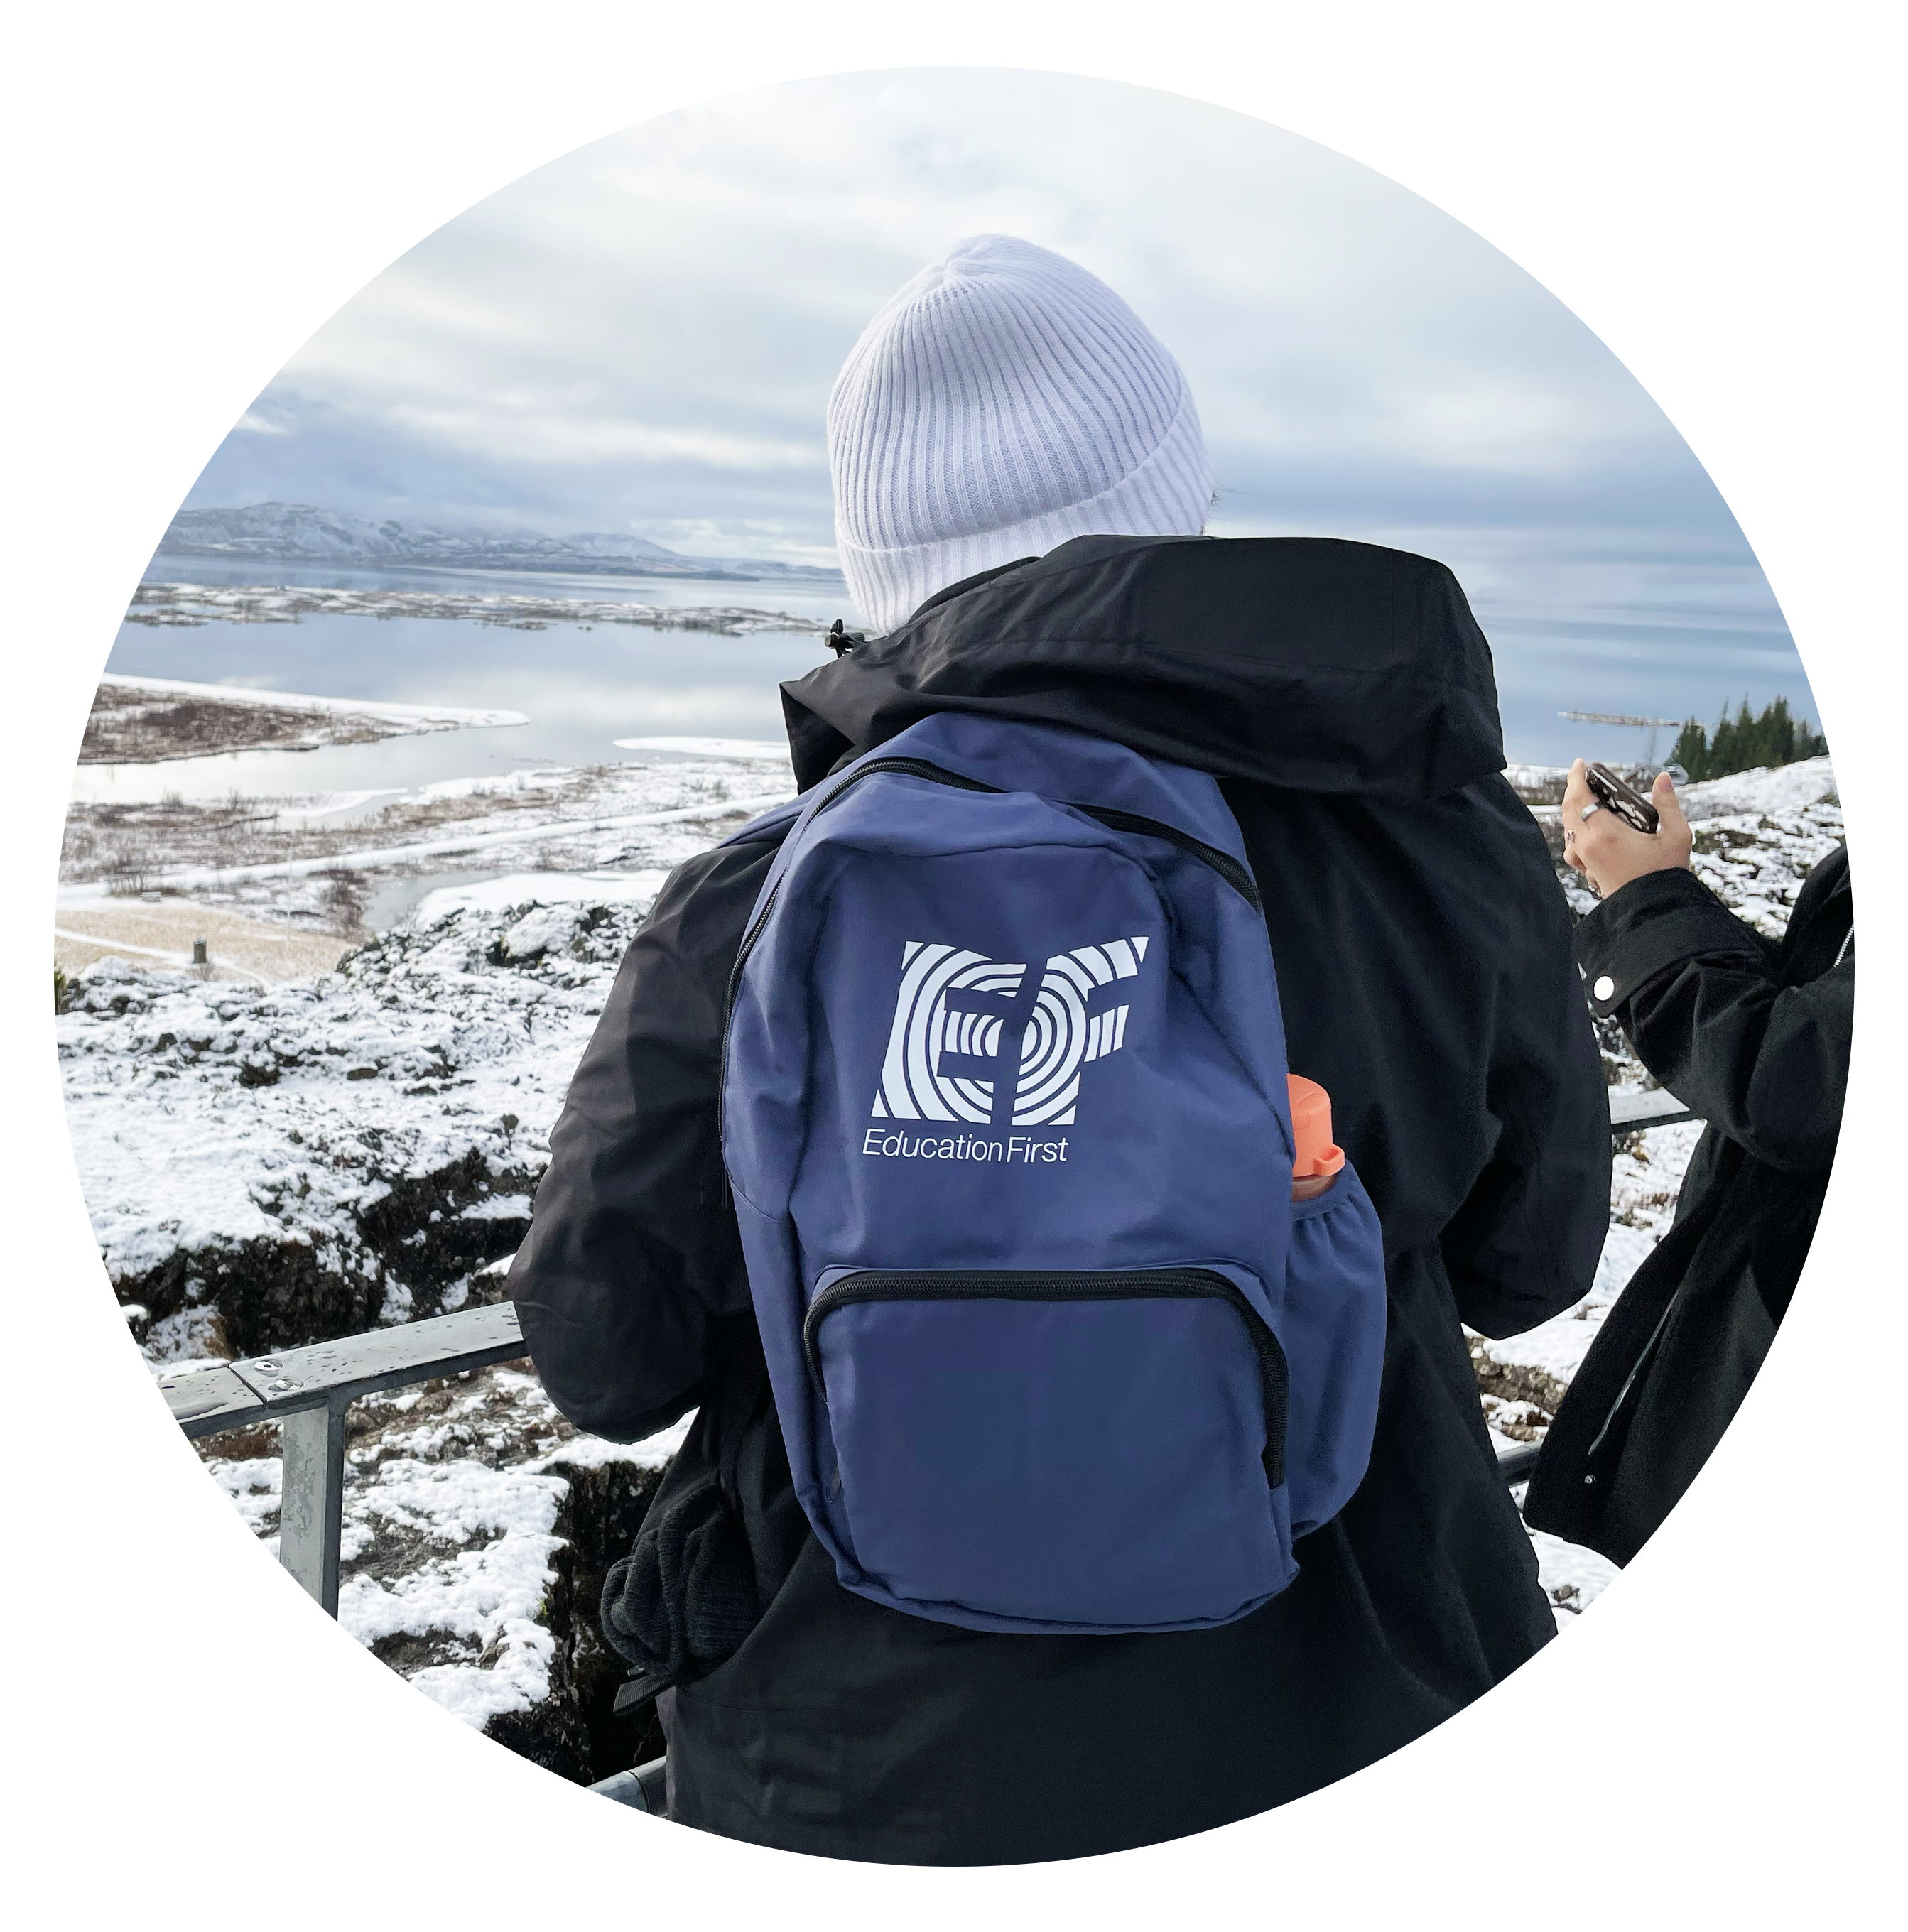 A close-up shot of EF's sustainable travel bag on a student in Iceland